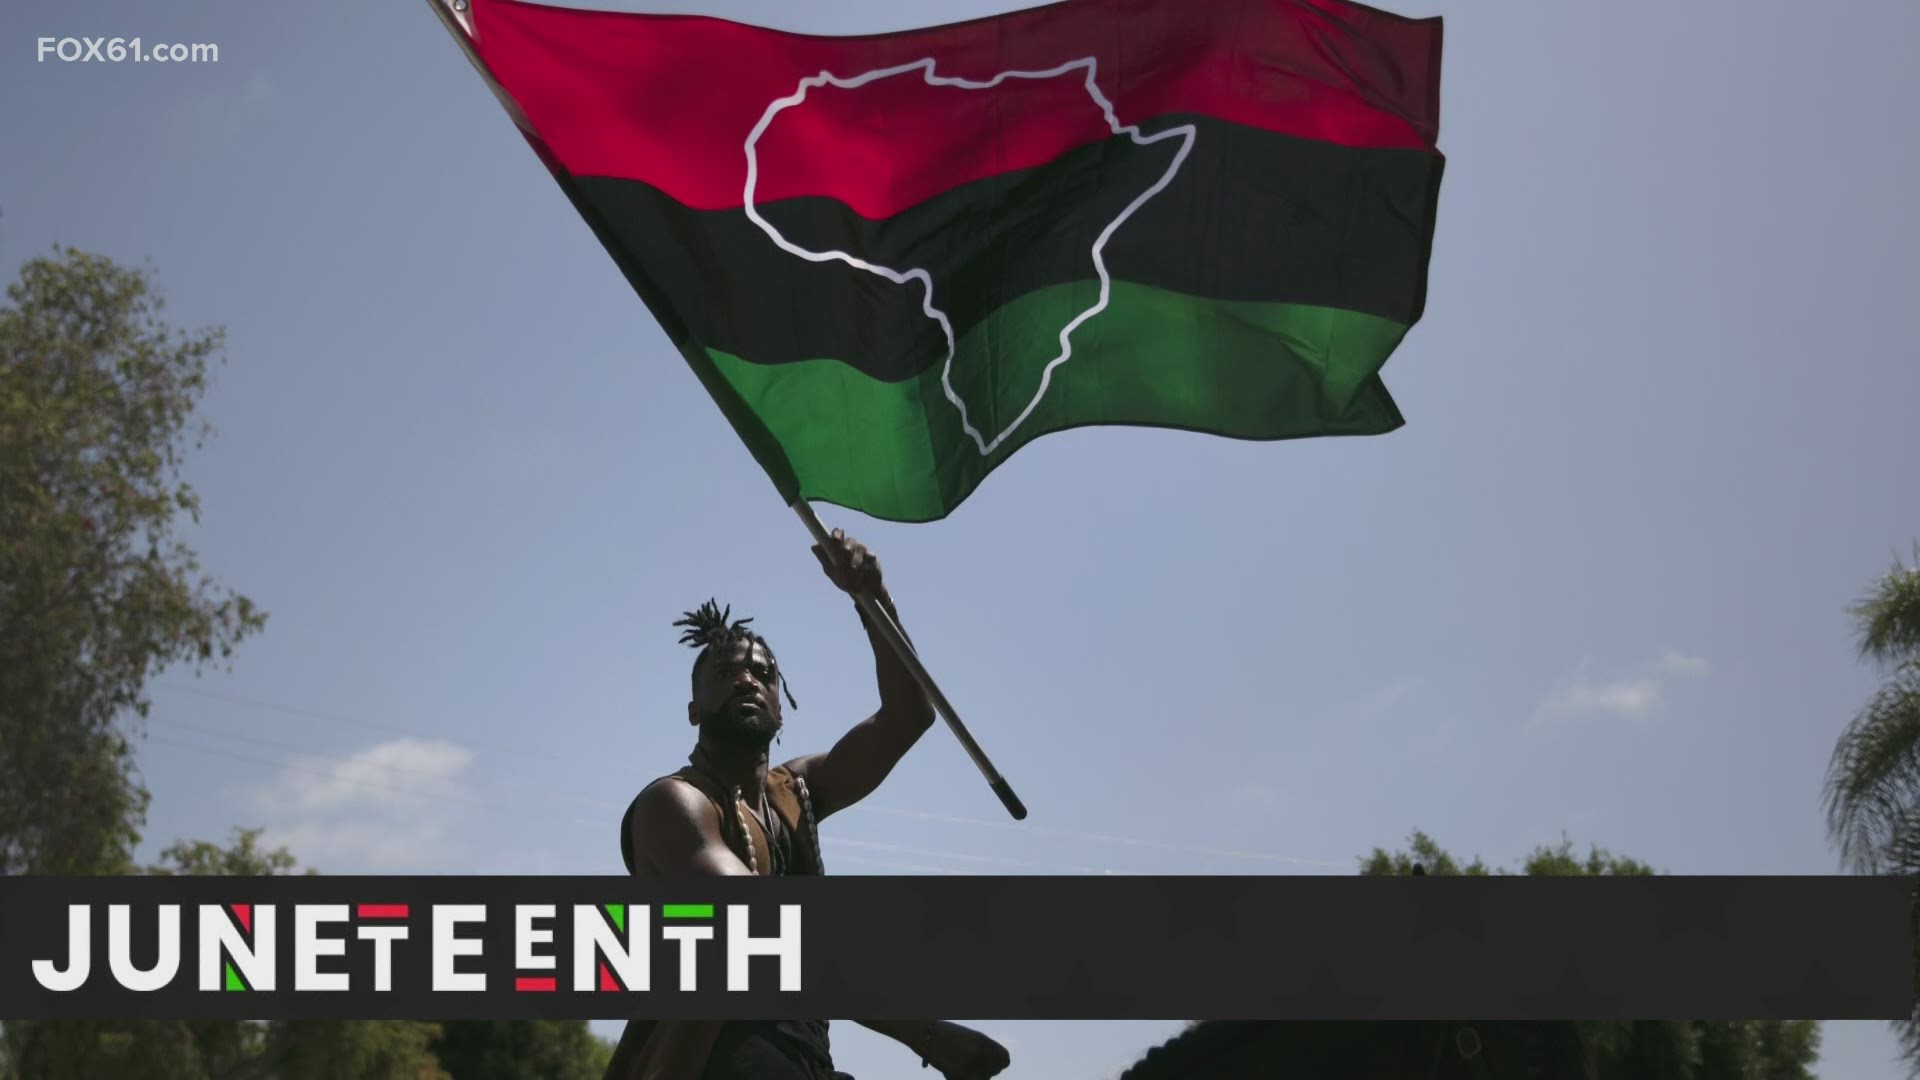 The half-hour special recognizing Juneteenth, also known as 'Freedom Day' will air Thursday, June 17 at 6 p.m., only on FOX61 News.